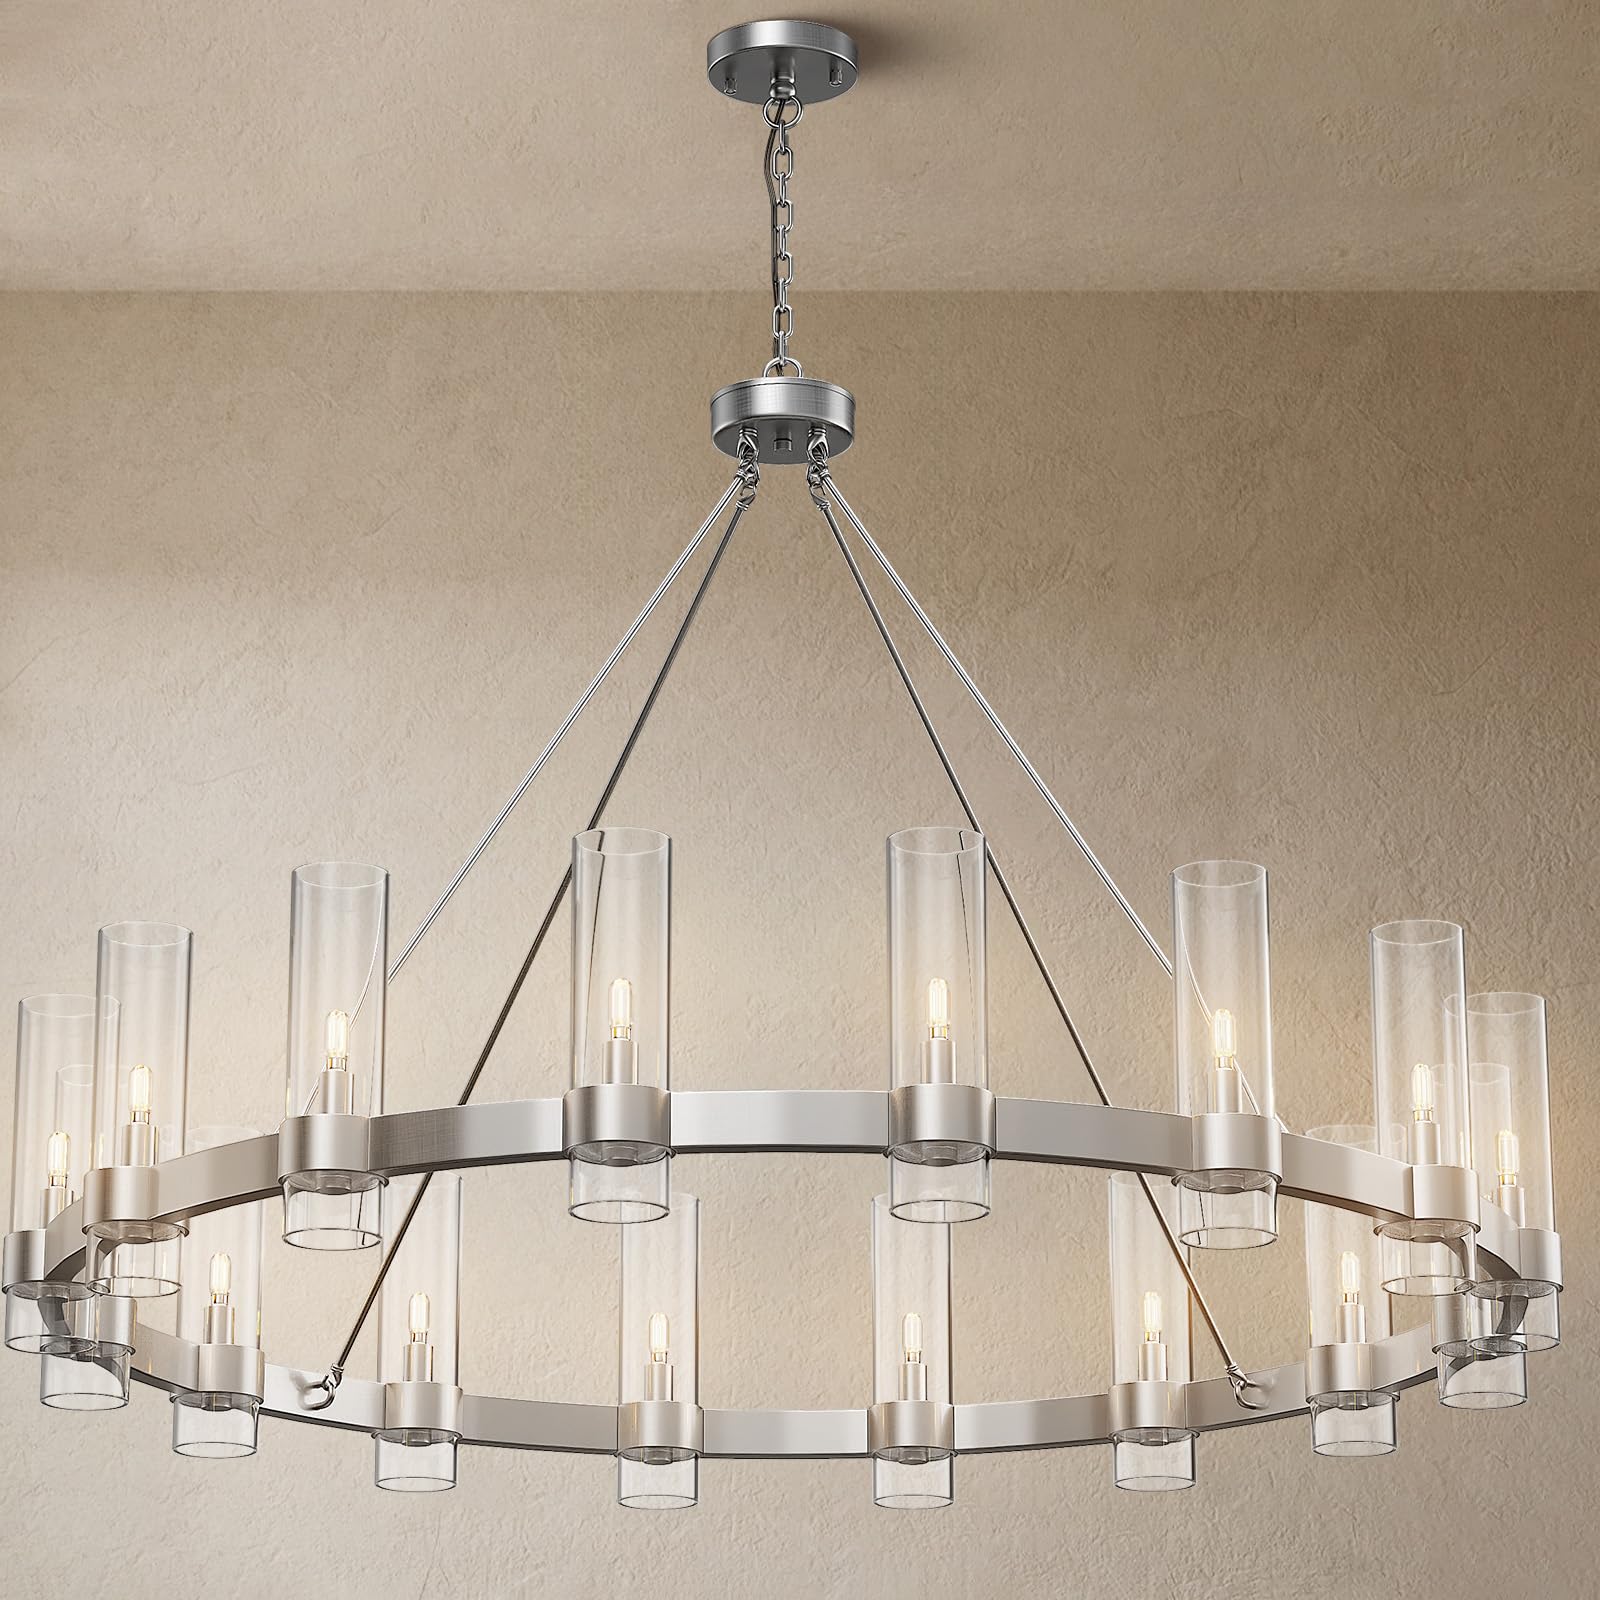 16-Lights Modern Chandelier,Wagon Wheel Chandelier with Glass Shade, Nickel48 Inch Large Round Industrial High Ceilings Pendant Lighting Fixture for Dining Living Room, Kitchen Island, Foyer